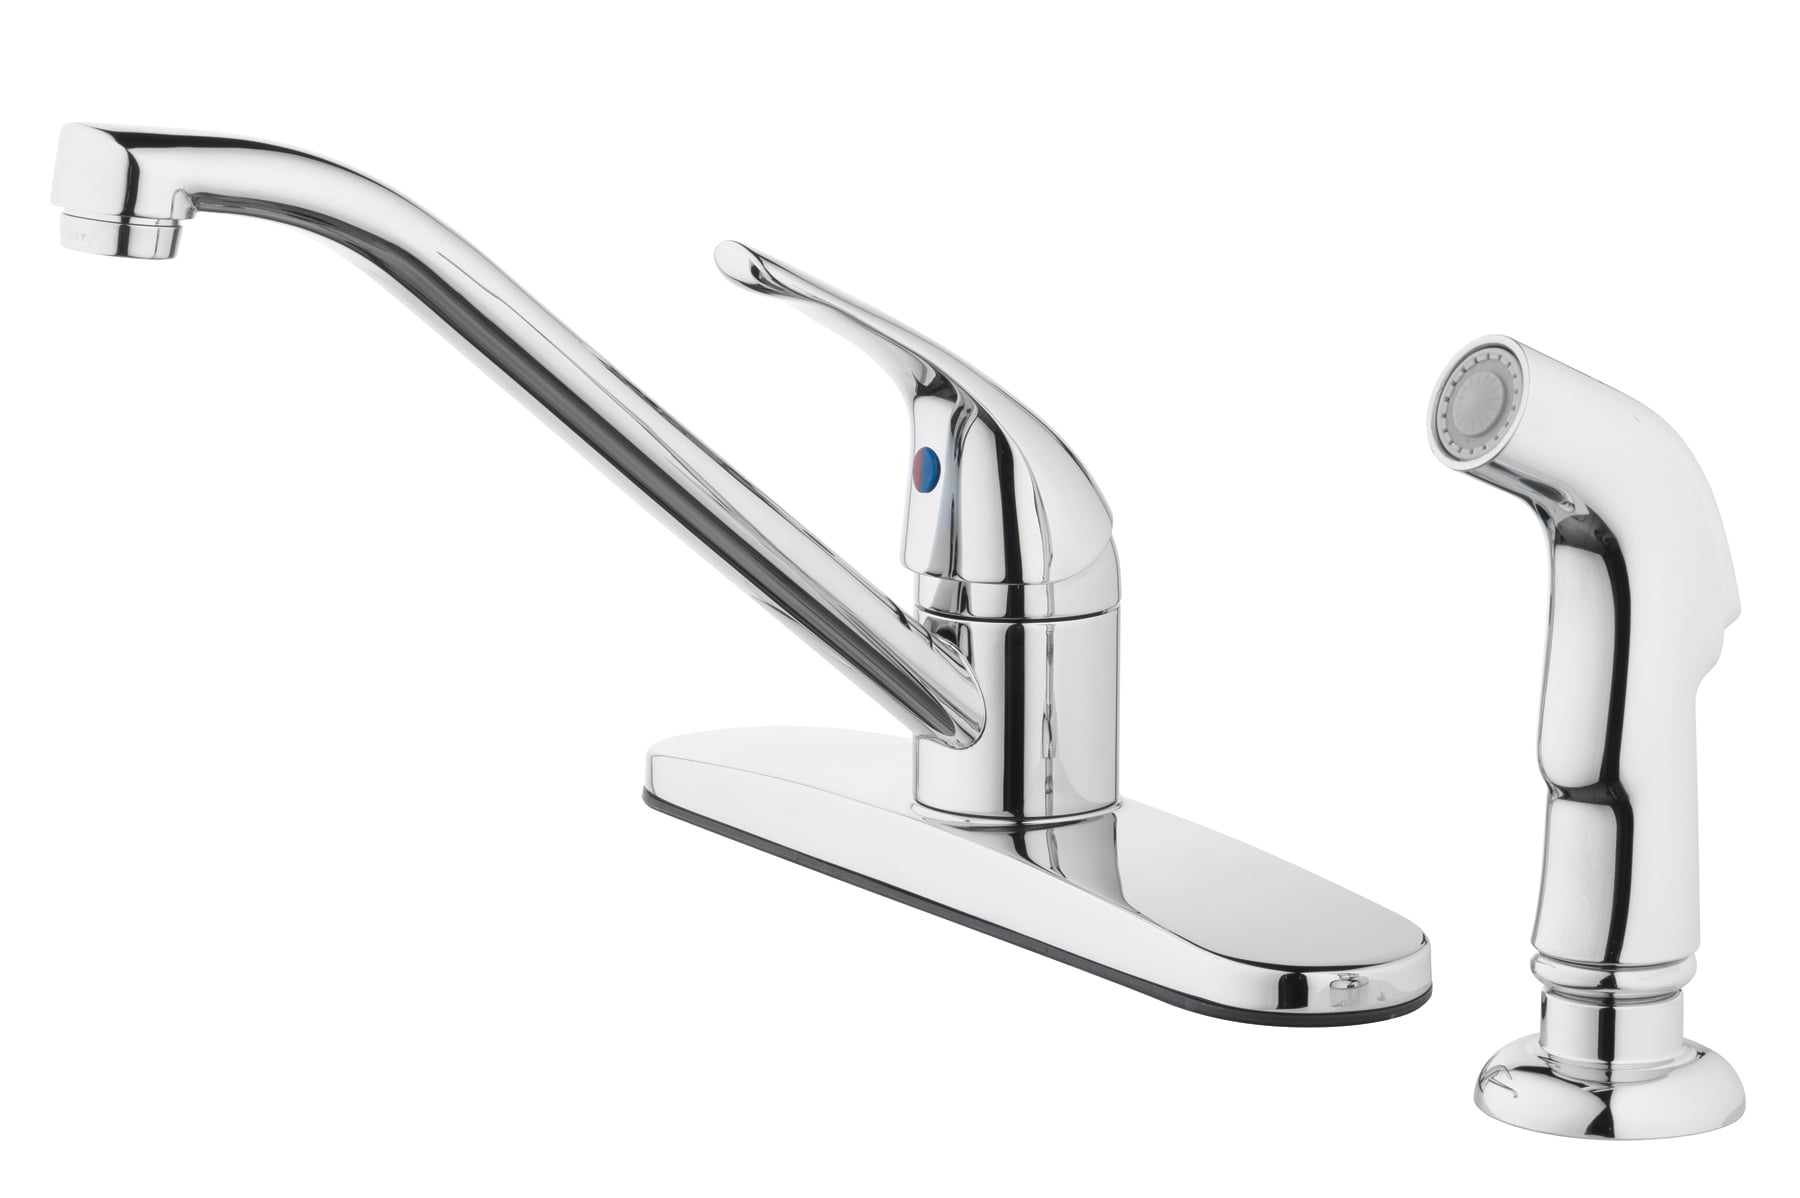 Single Handle Kitchen Faucet With